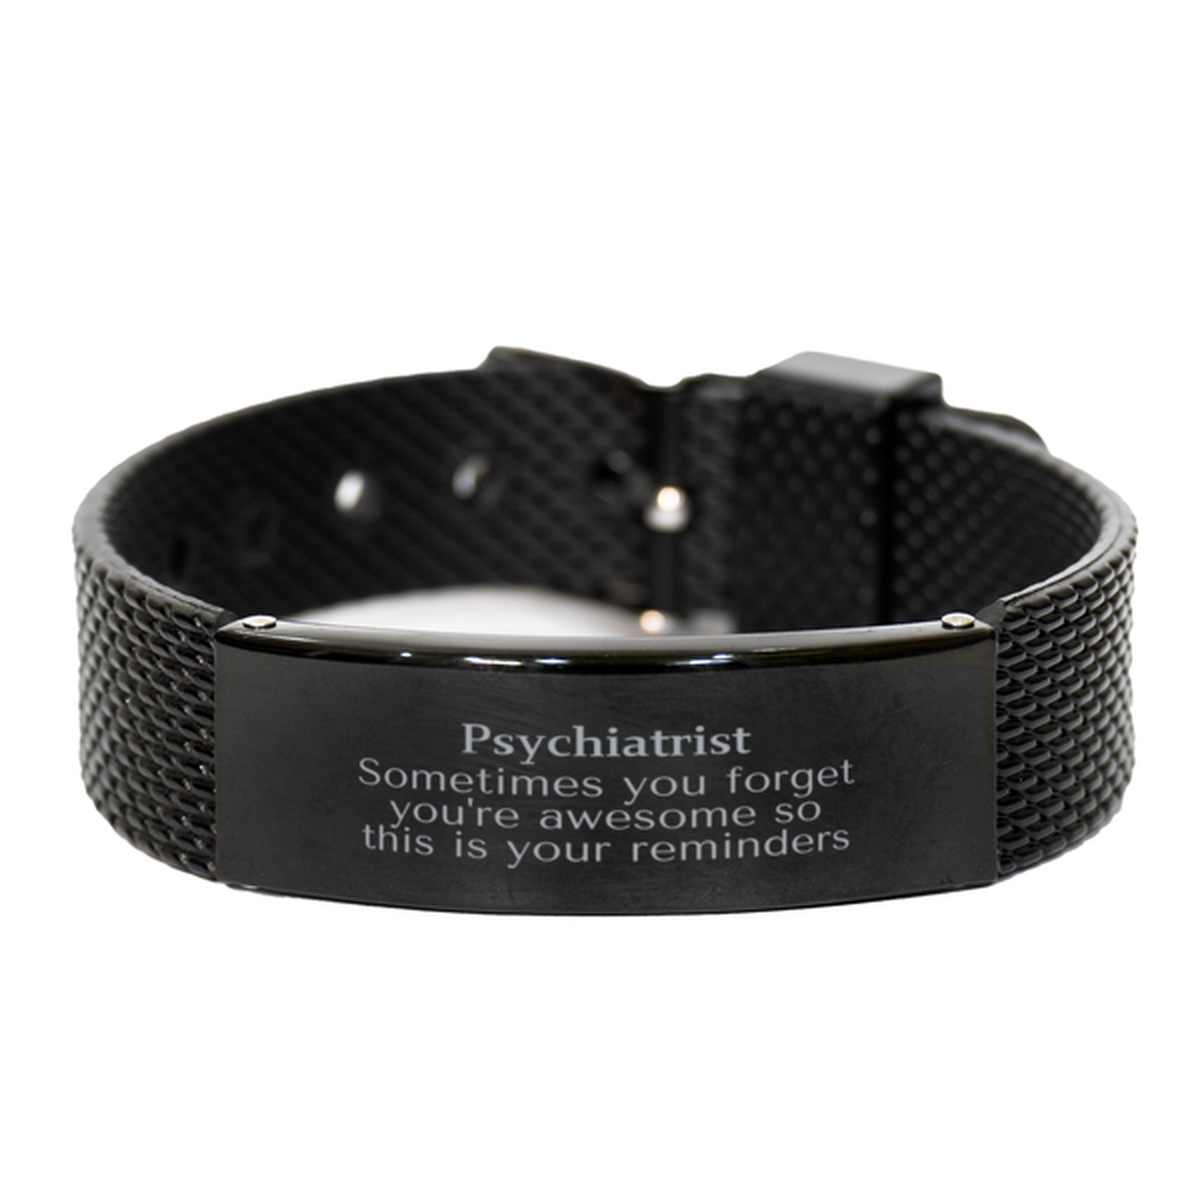 Sentimental Psychiatrist Black Shark Mesh Bracelet, Psychiatrist Sometimes you forget you're awesome so this is your reminders, Graduation Christmas Birthday Gifts for Psychiatrist, Men, Women, Coworkers